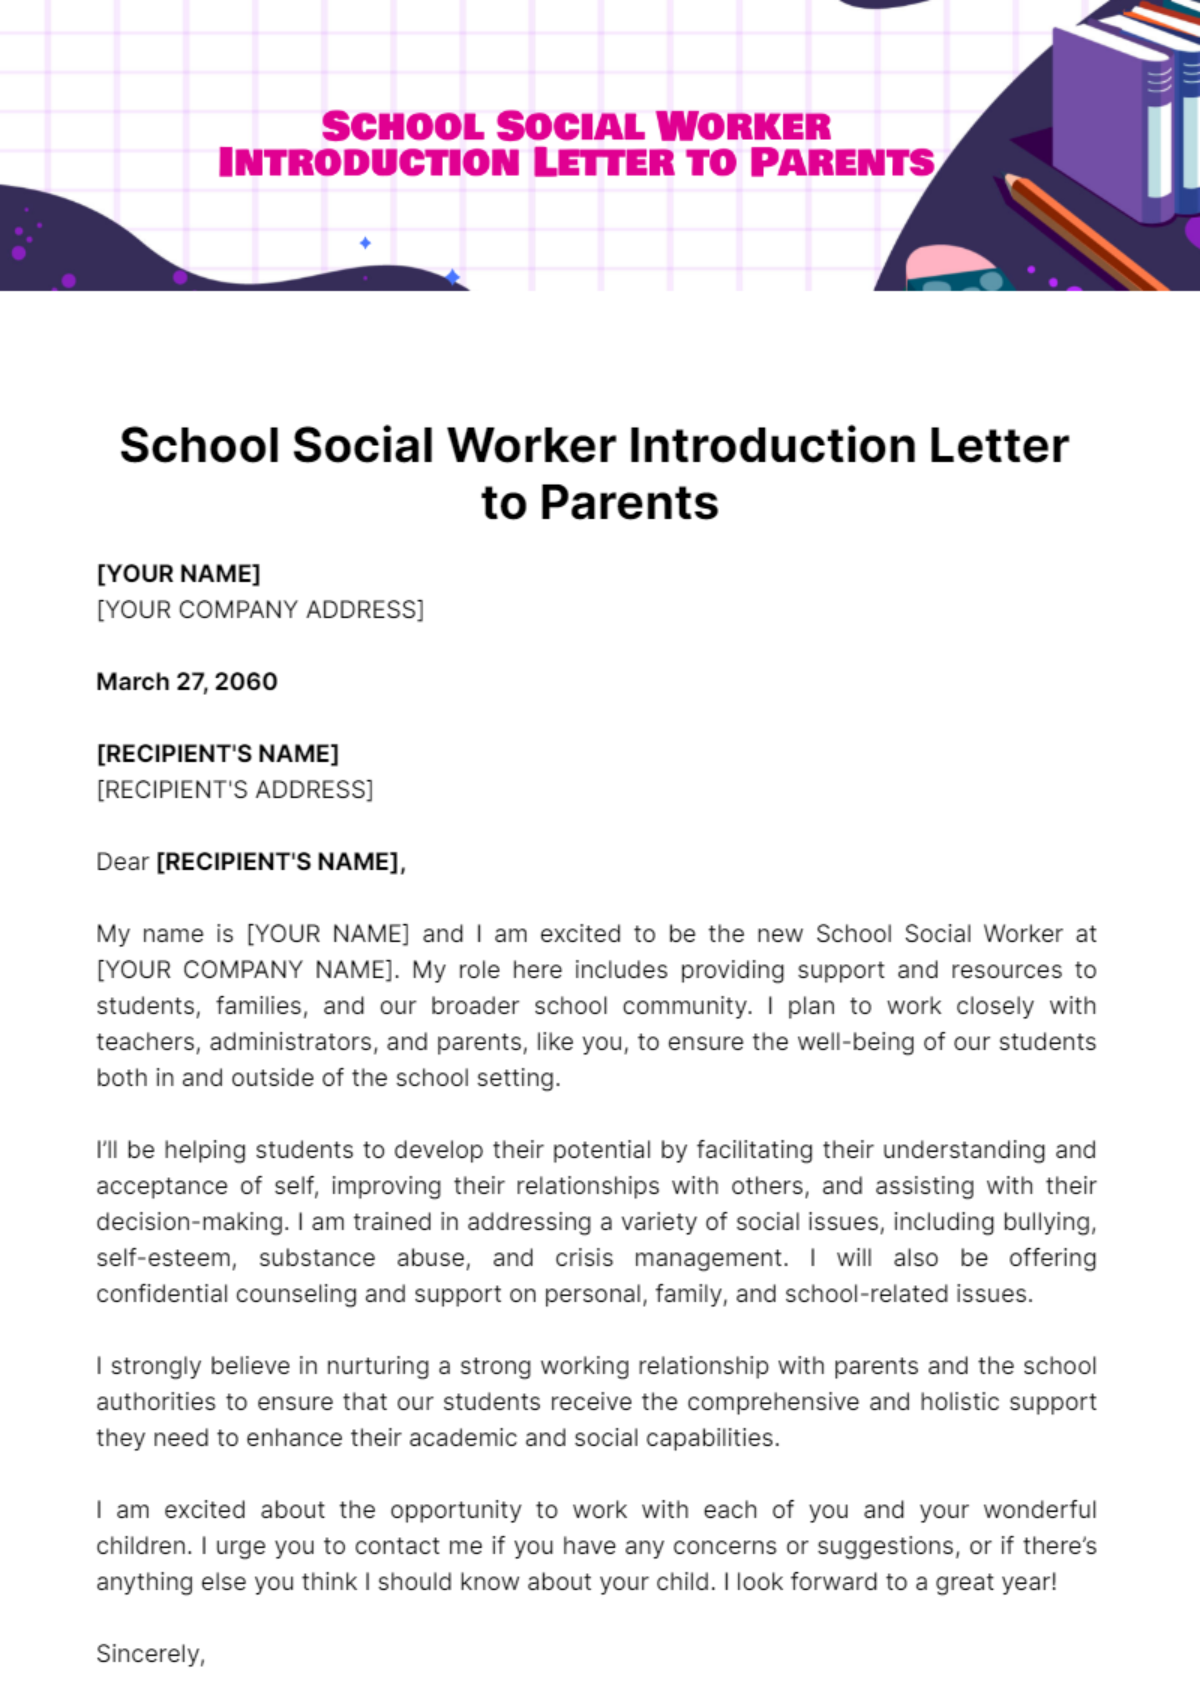 Free School Social Worker Introduction Letter to Parents Template